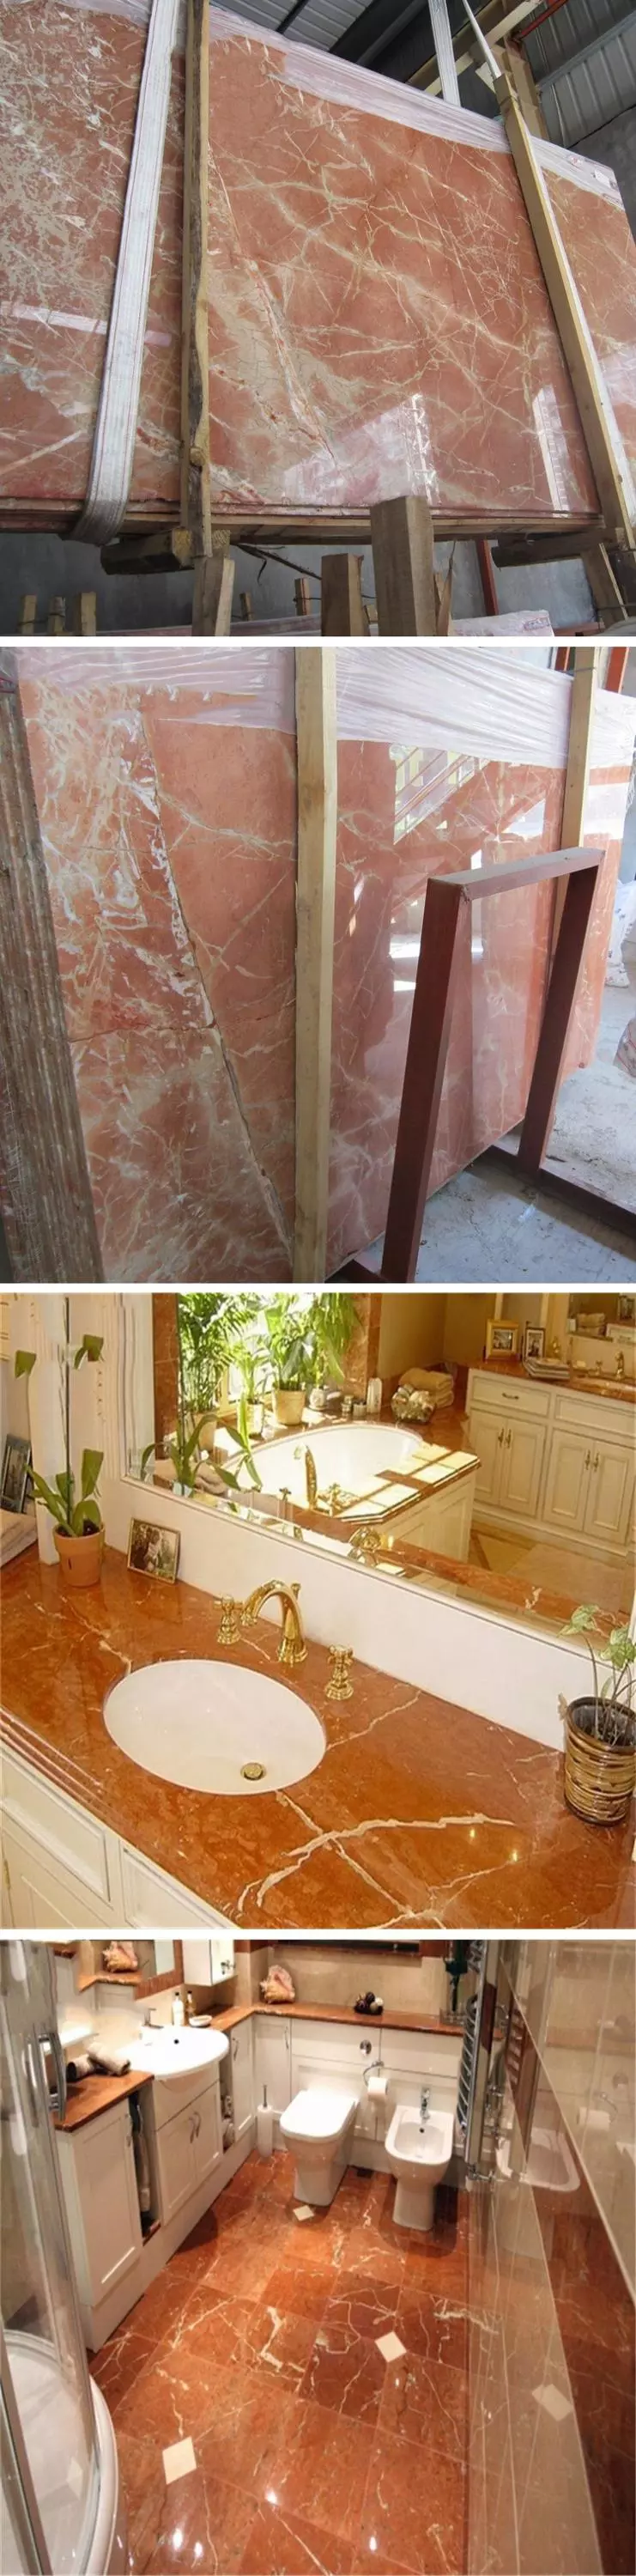 Wholesale Rojo Alicante Orange Red Marble For Hotel From Stone Company